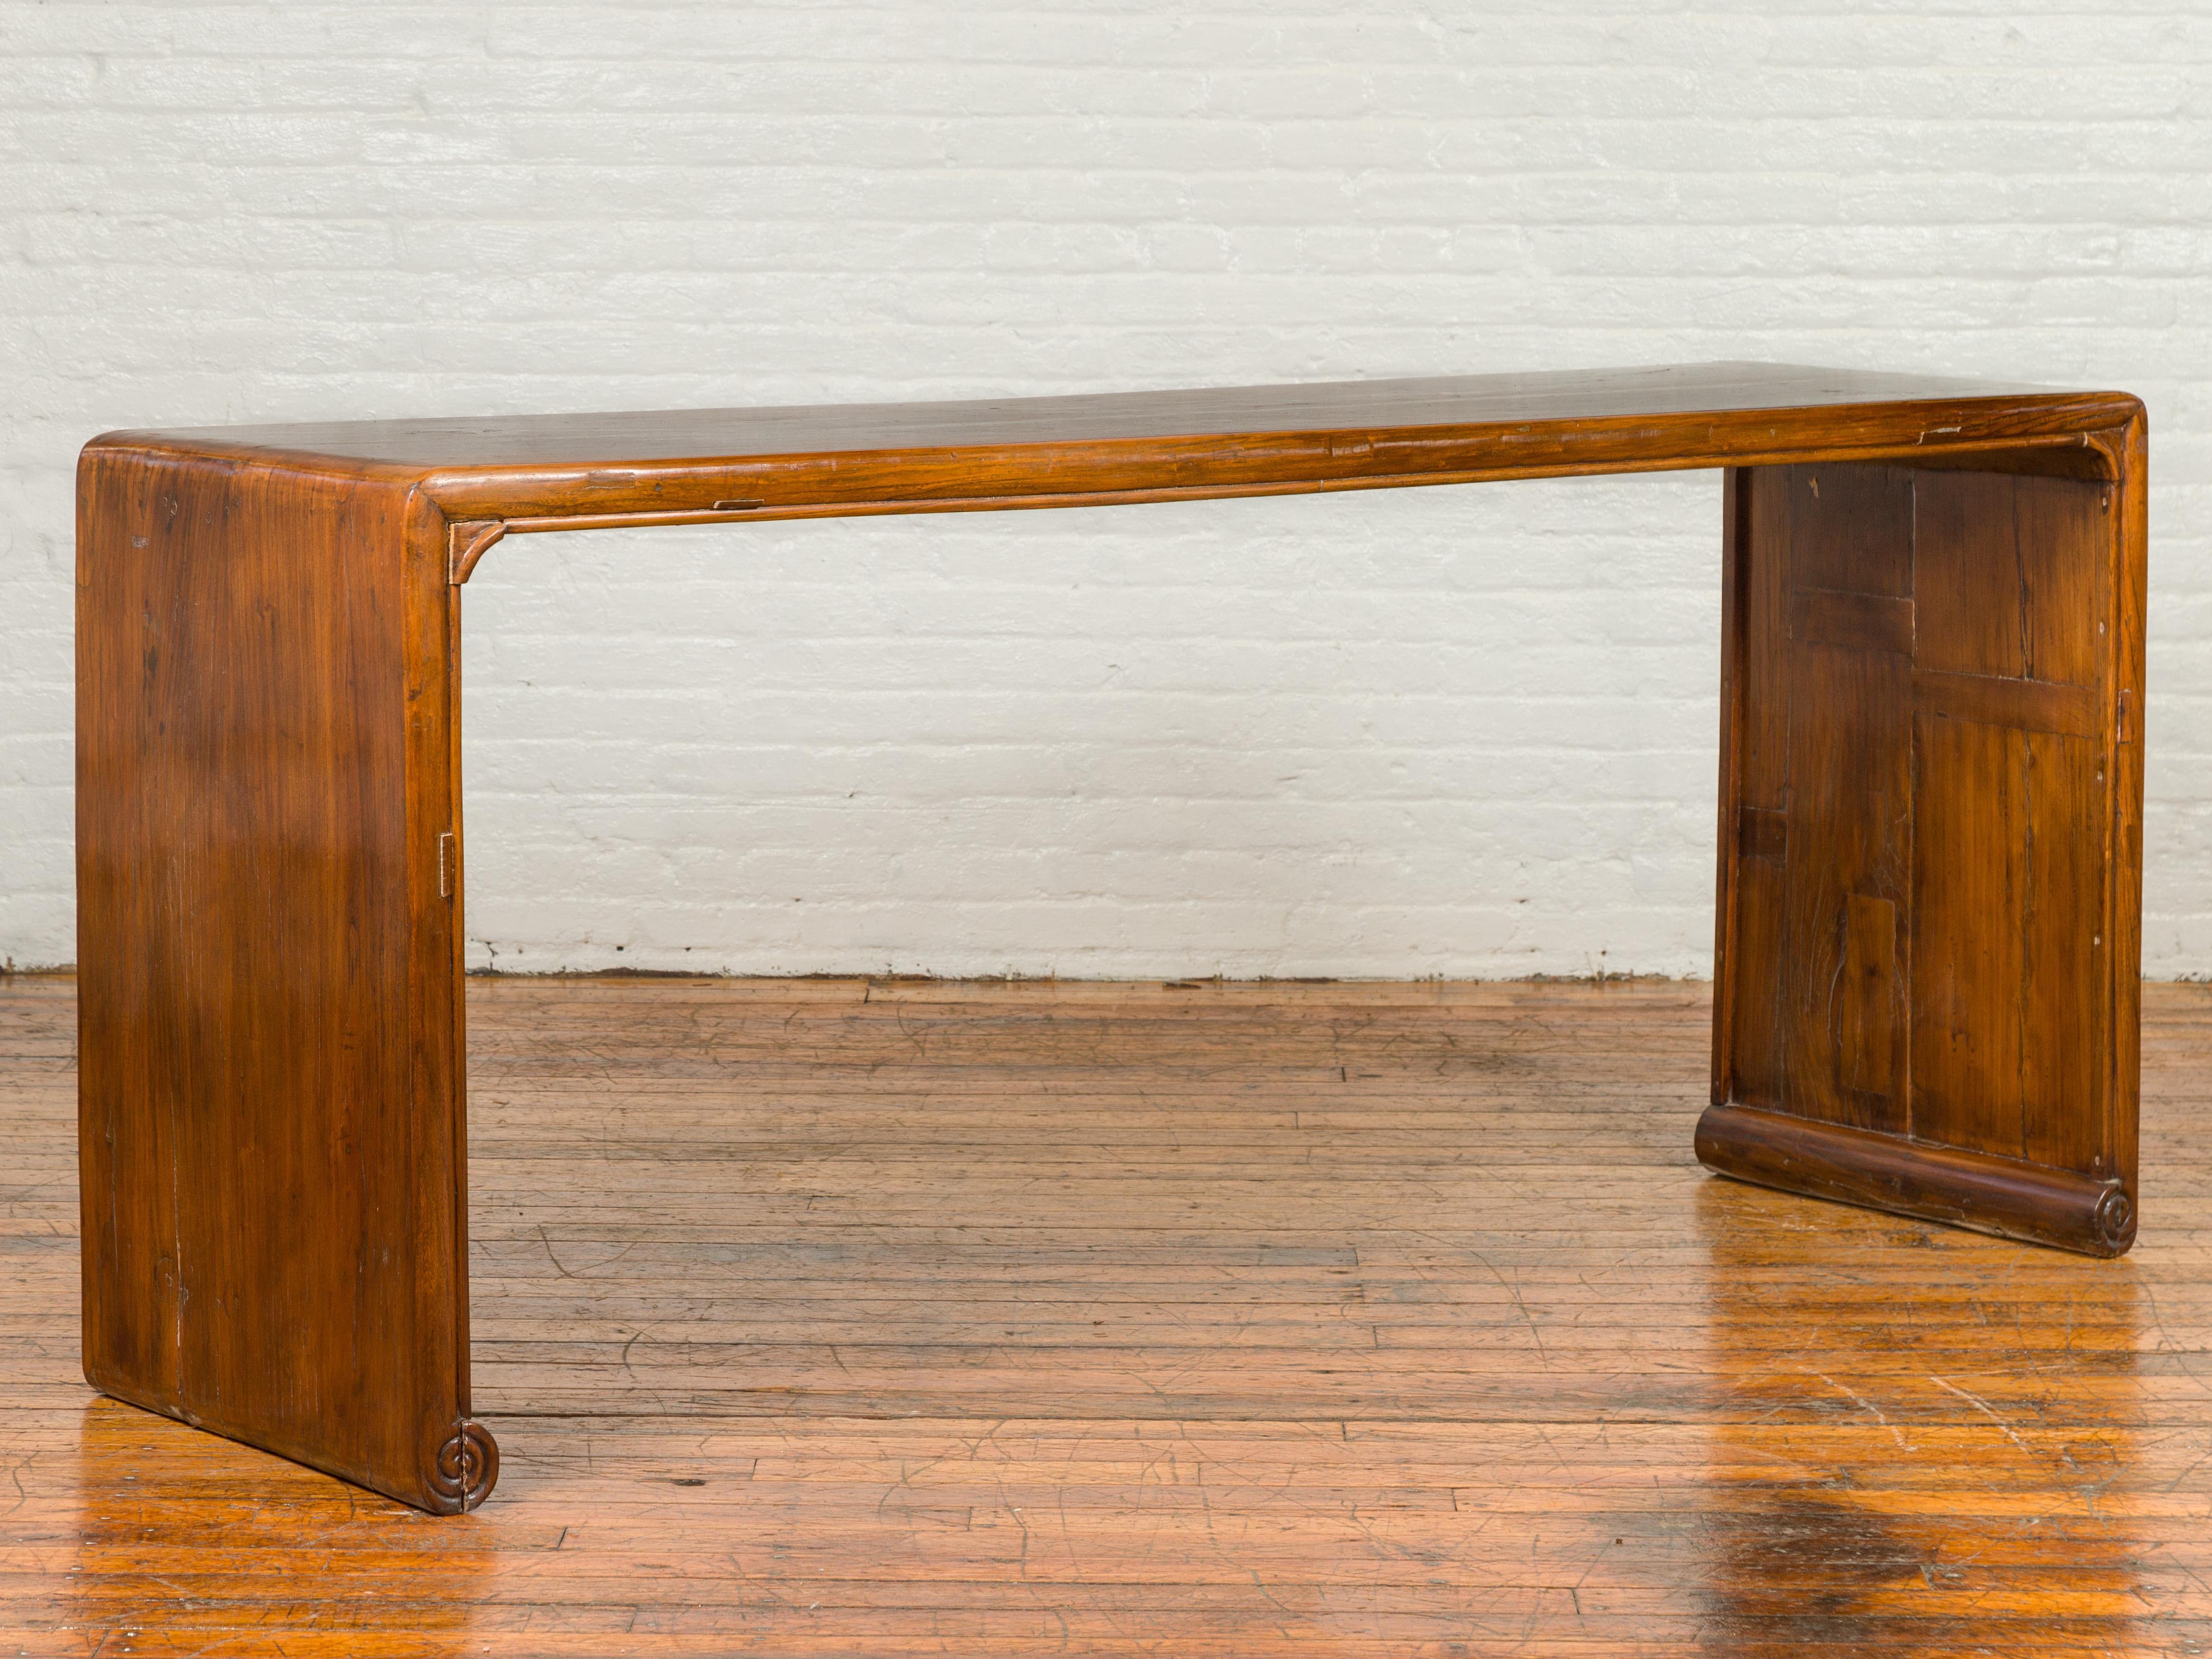 An antique Chinese Qing Dynasty waterfall console table from the 19th century, with scrolling feet and warm patina. Crafted in China during the 19th century this console table features a waterfall wooden frame with solid boards, boasting a lovely